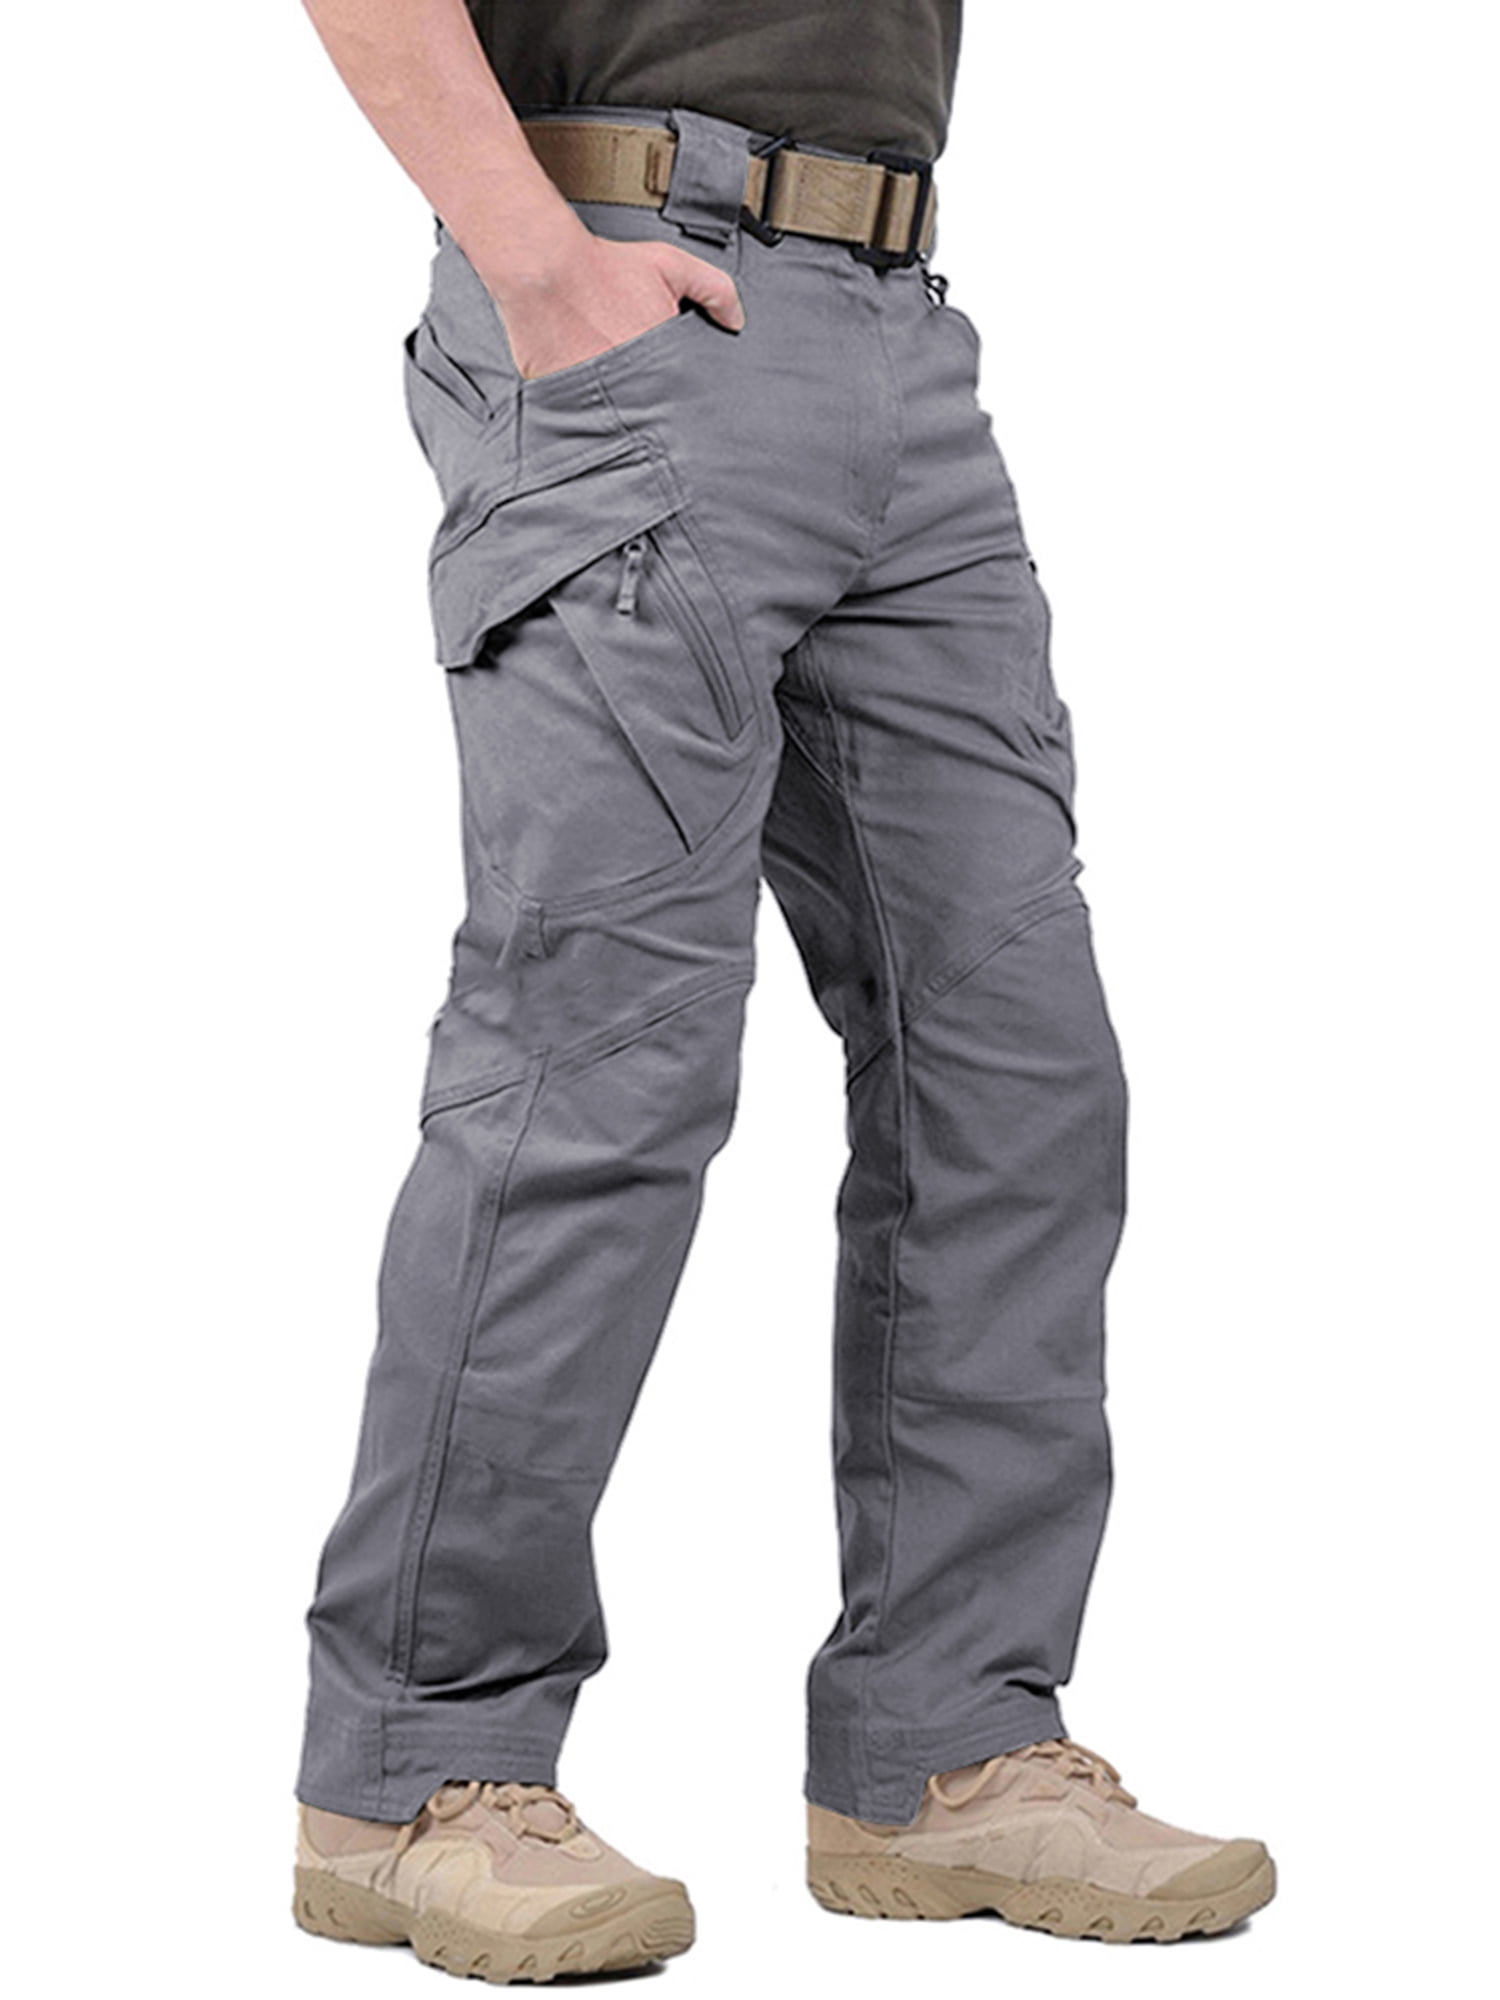 FEDTOSING Relaxed Work Cargo Pants Outdoor Mens Pant Gray